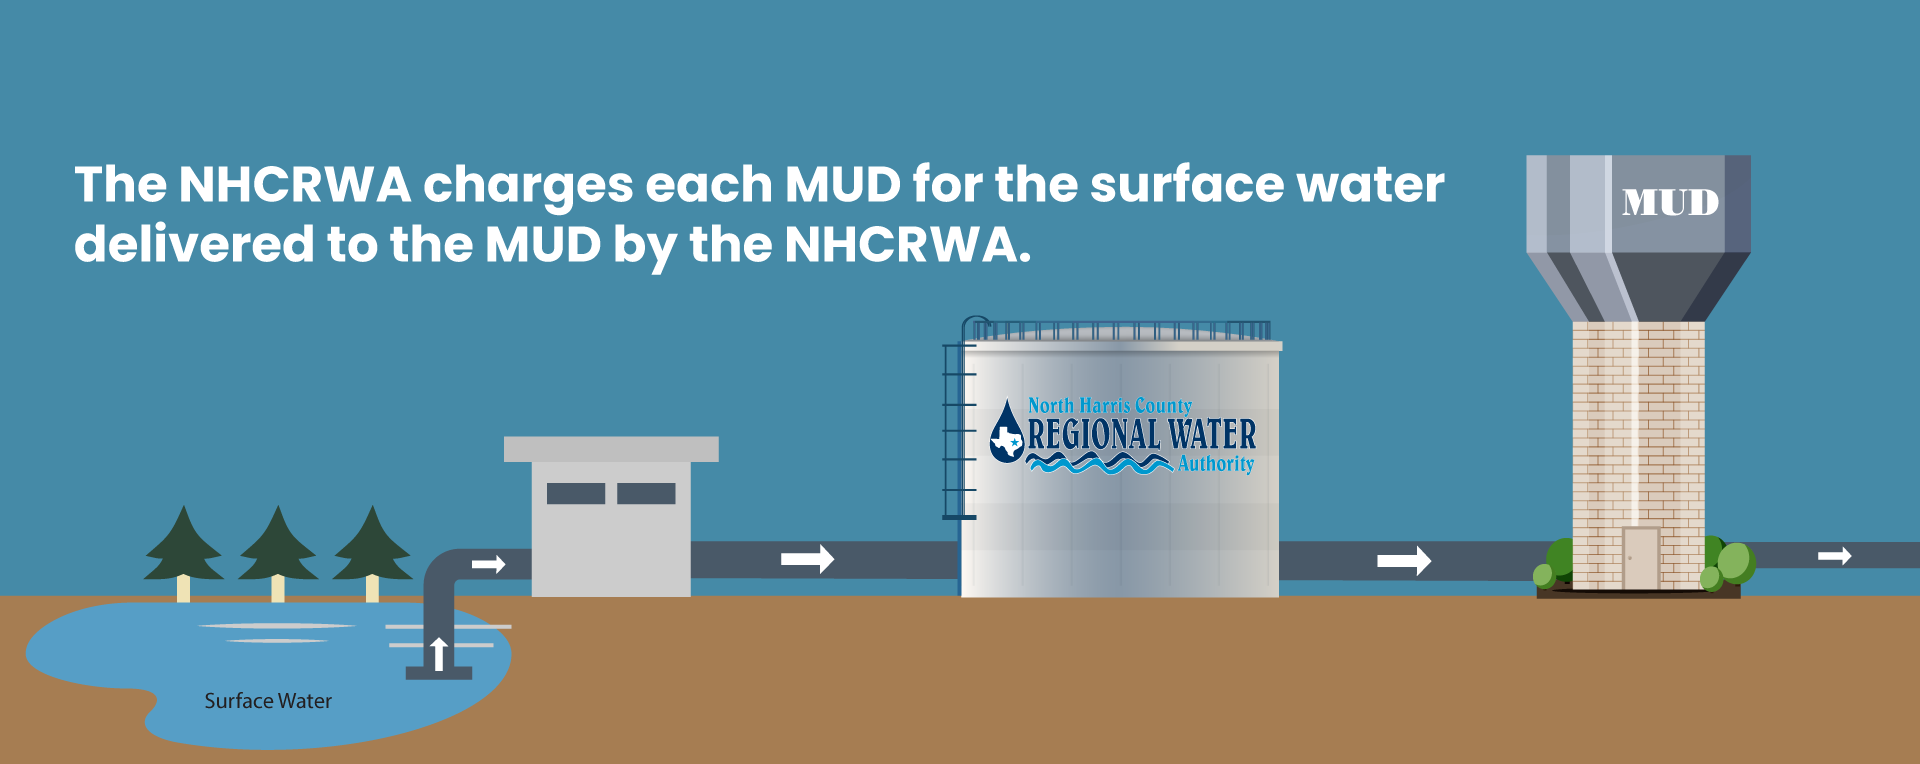 NHCRWA charges each MUD for the surface water delivered to the MUD by the NHCRWA